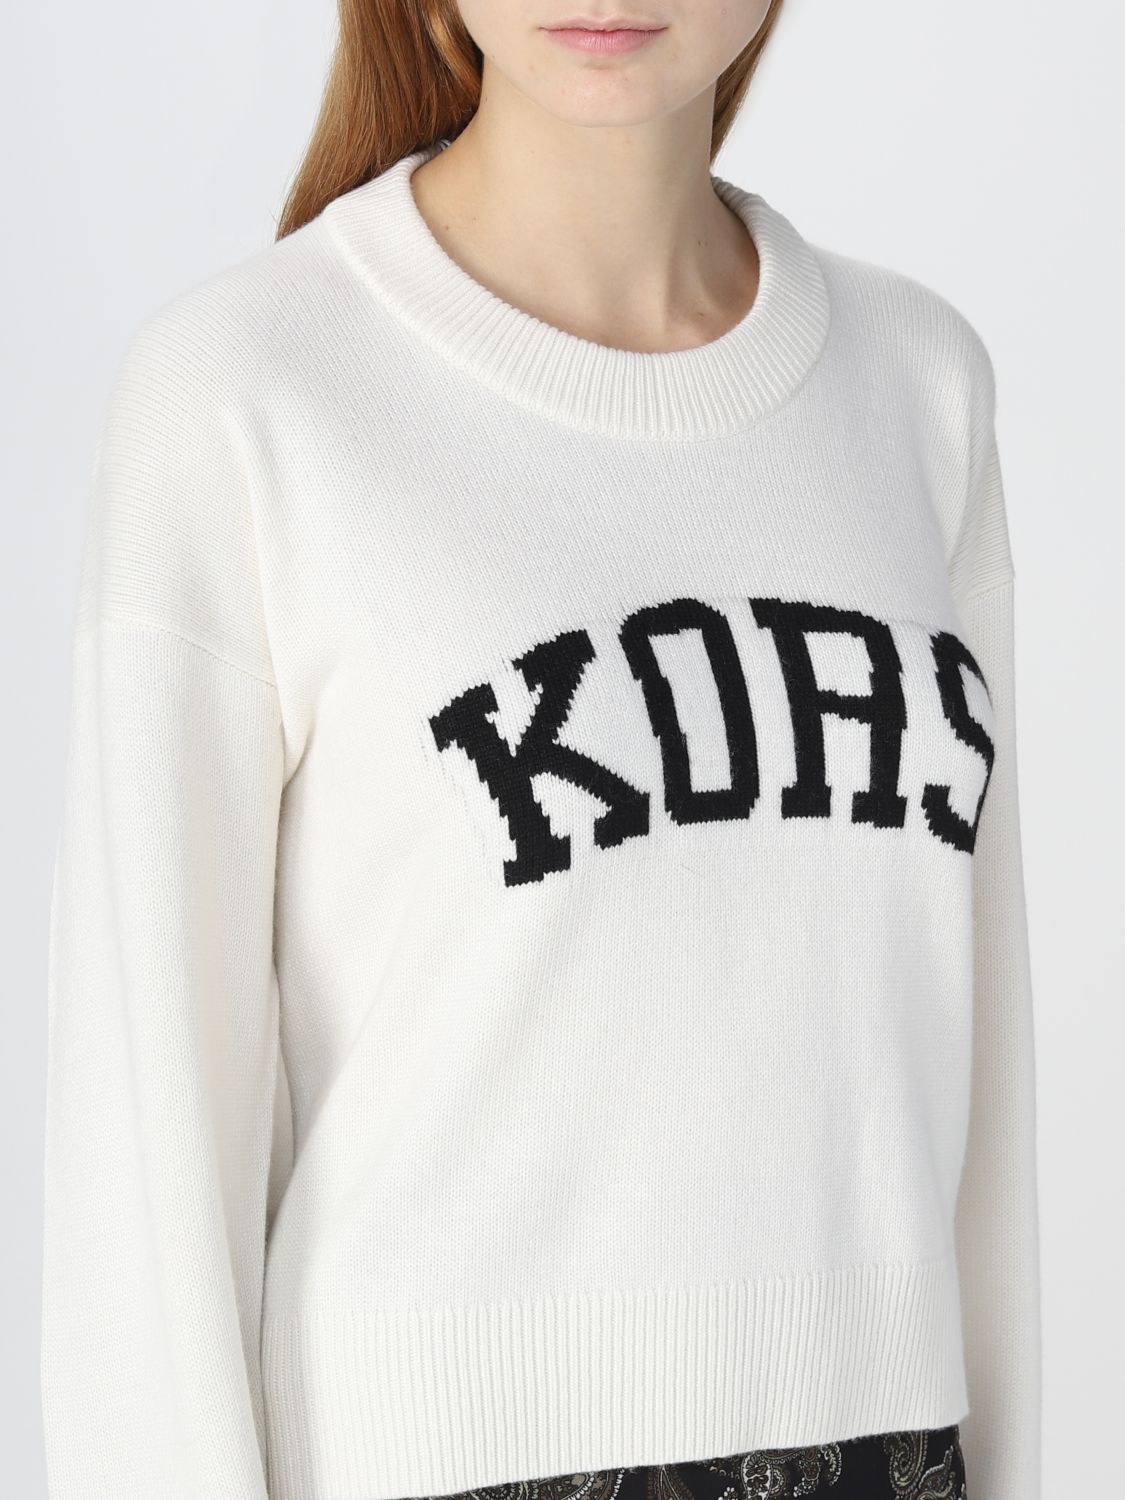 Michael Kors Outlet: sweater for woman - White | Michael Kors sweater  MF260FNCSN online on 